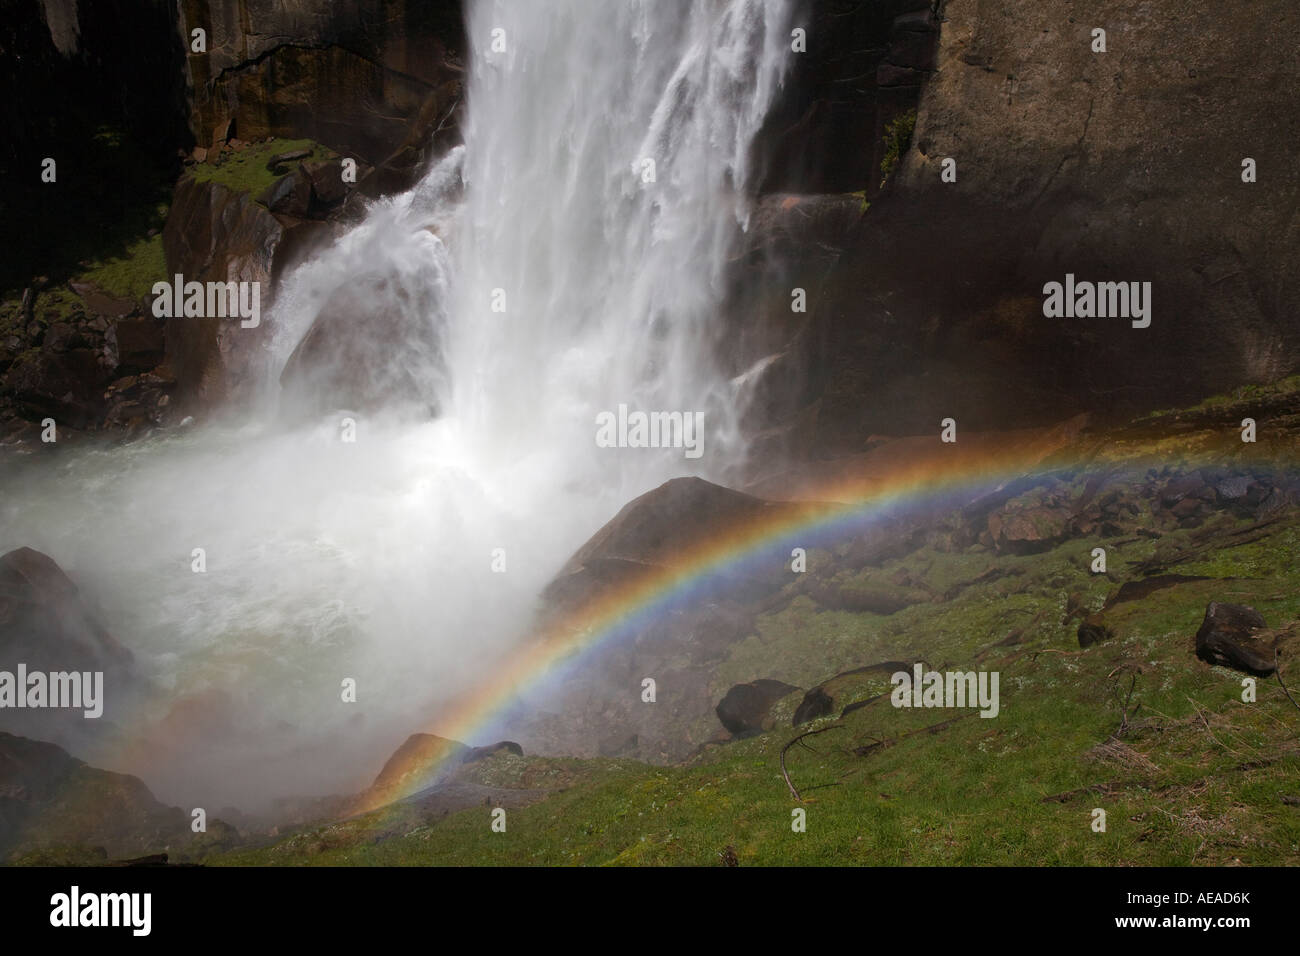 A rainbow forms at VERNAL FALLS which drops 317 feet during the SPRING run off YOSEMITE NATIONAL PARK CALIFORNIA Stock Photo